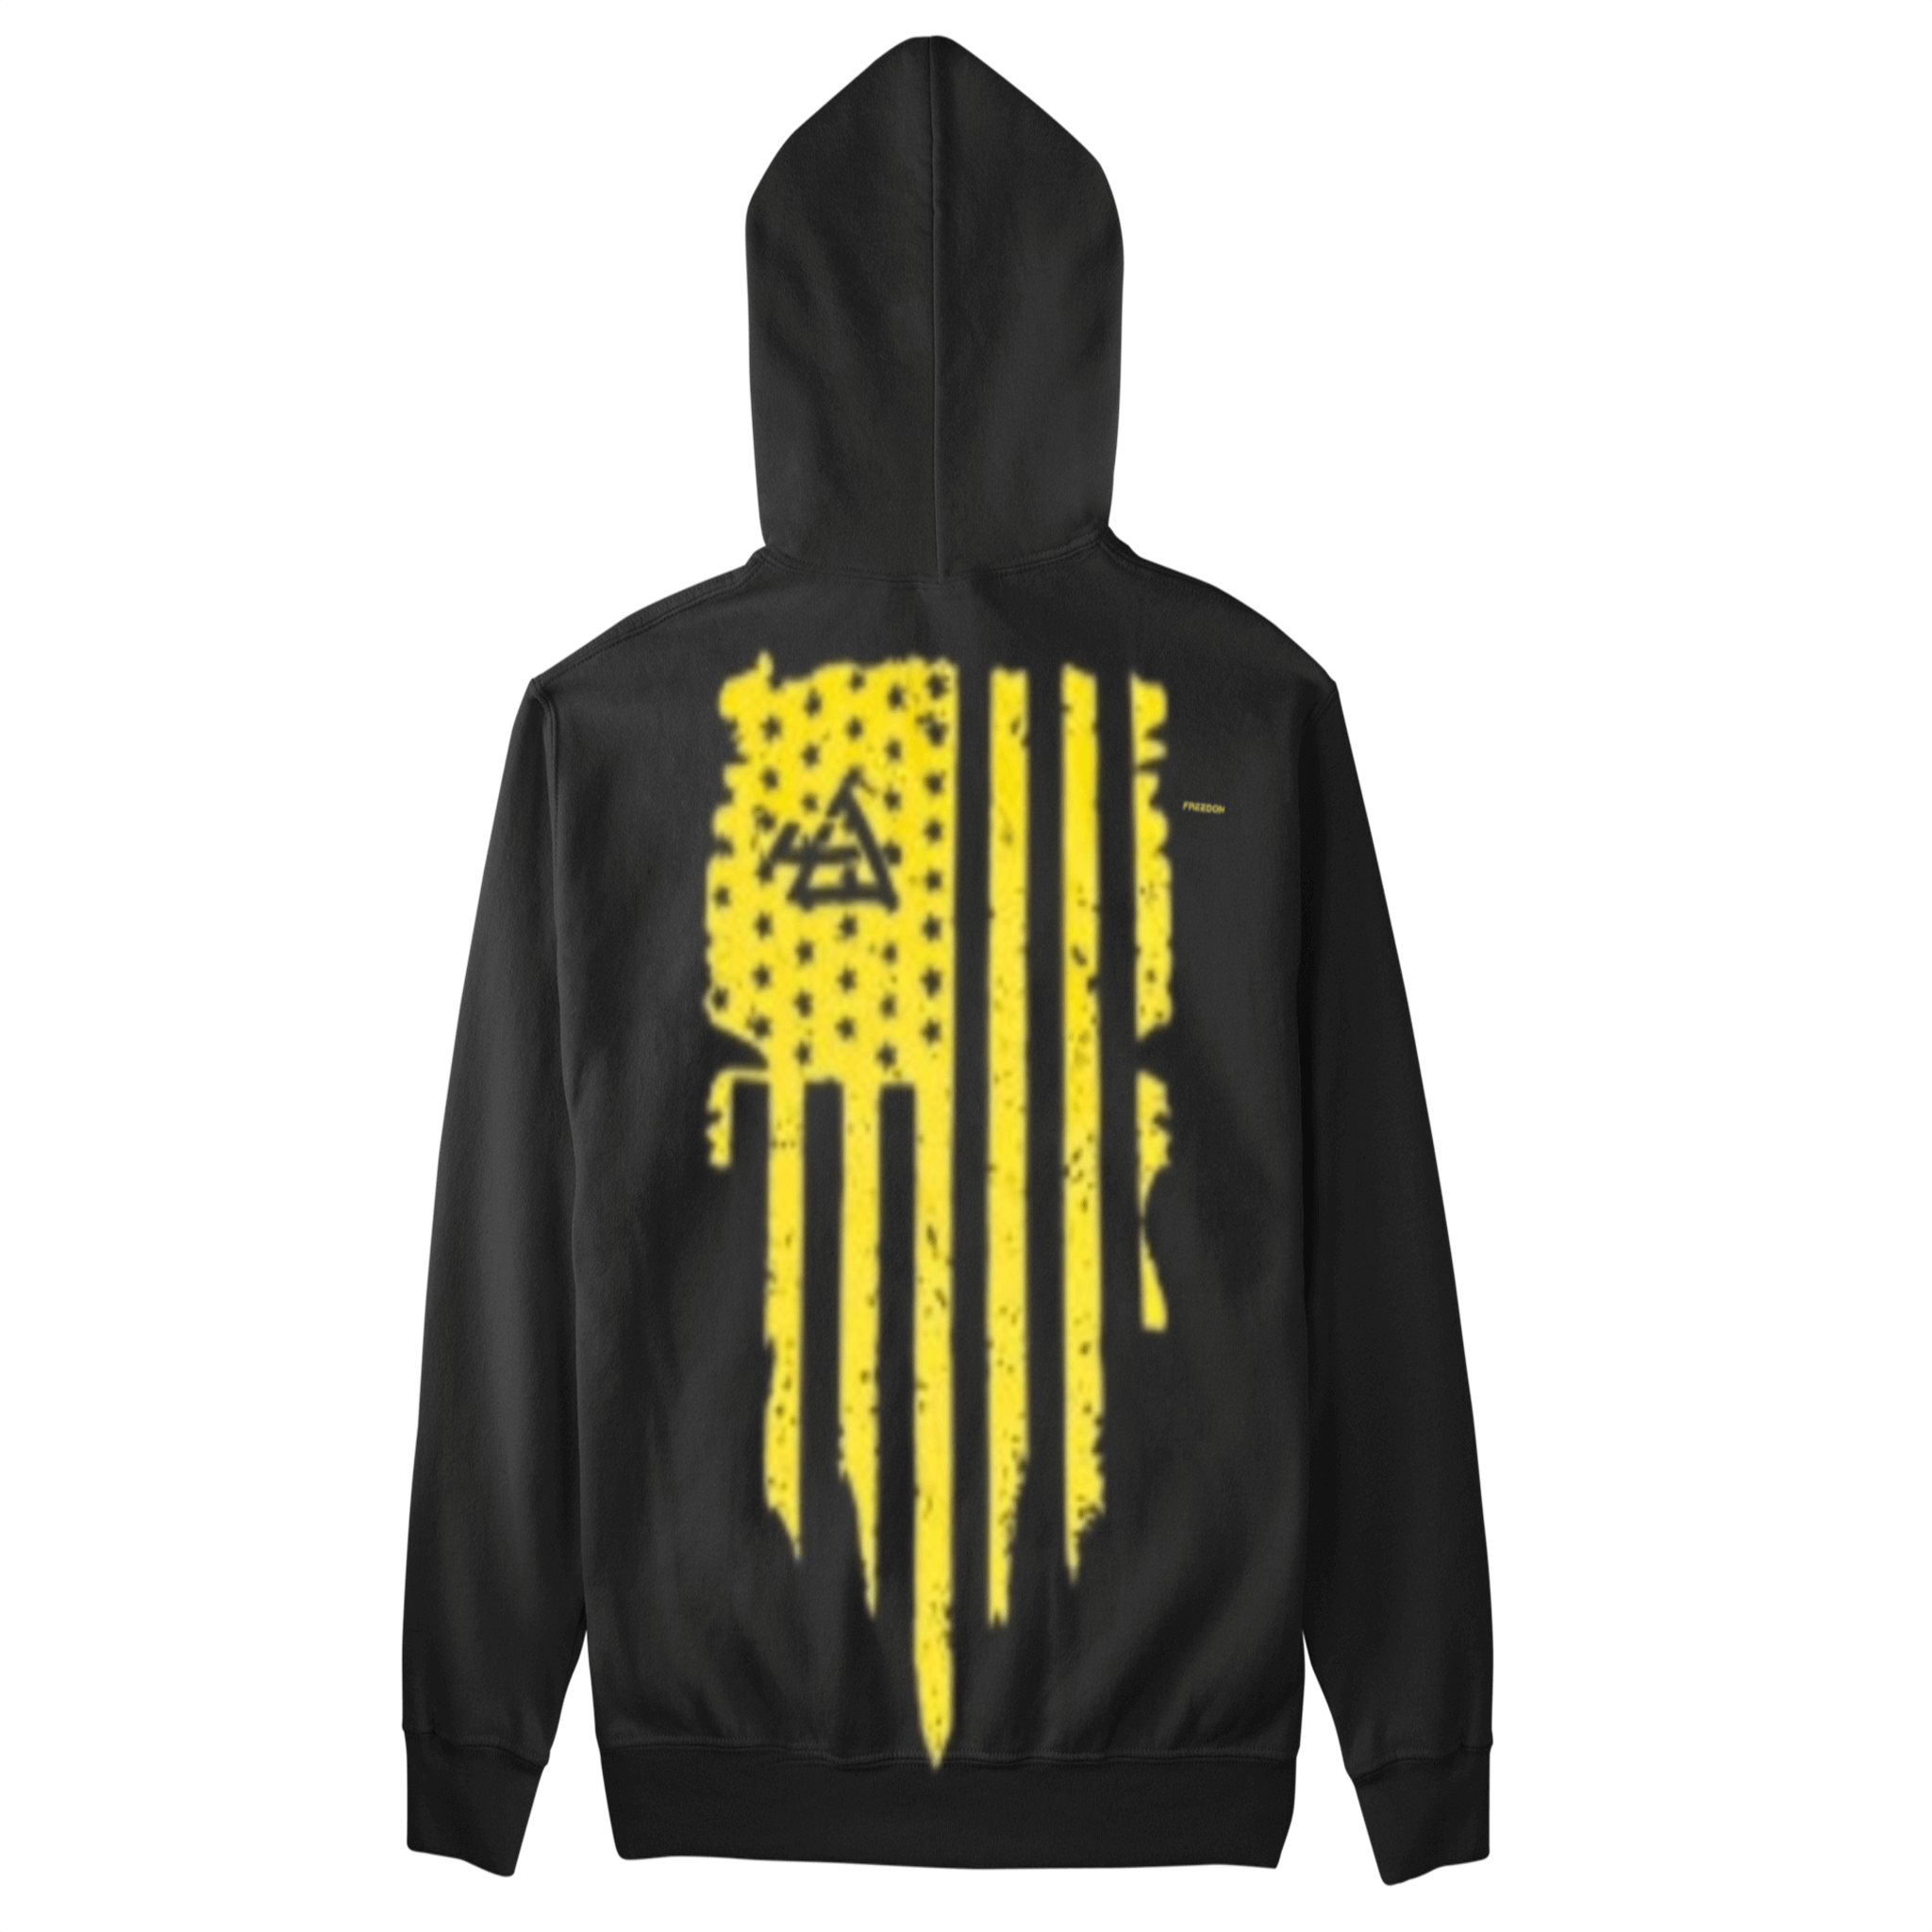 freedom hoodie for first responders and military